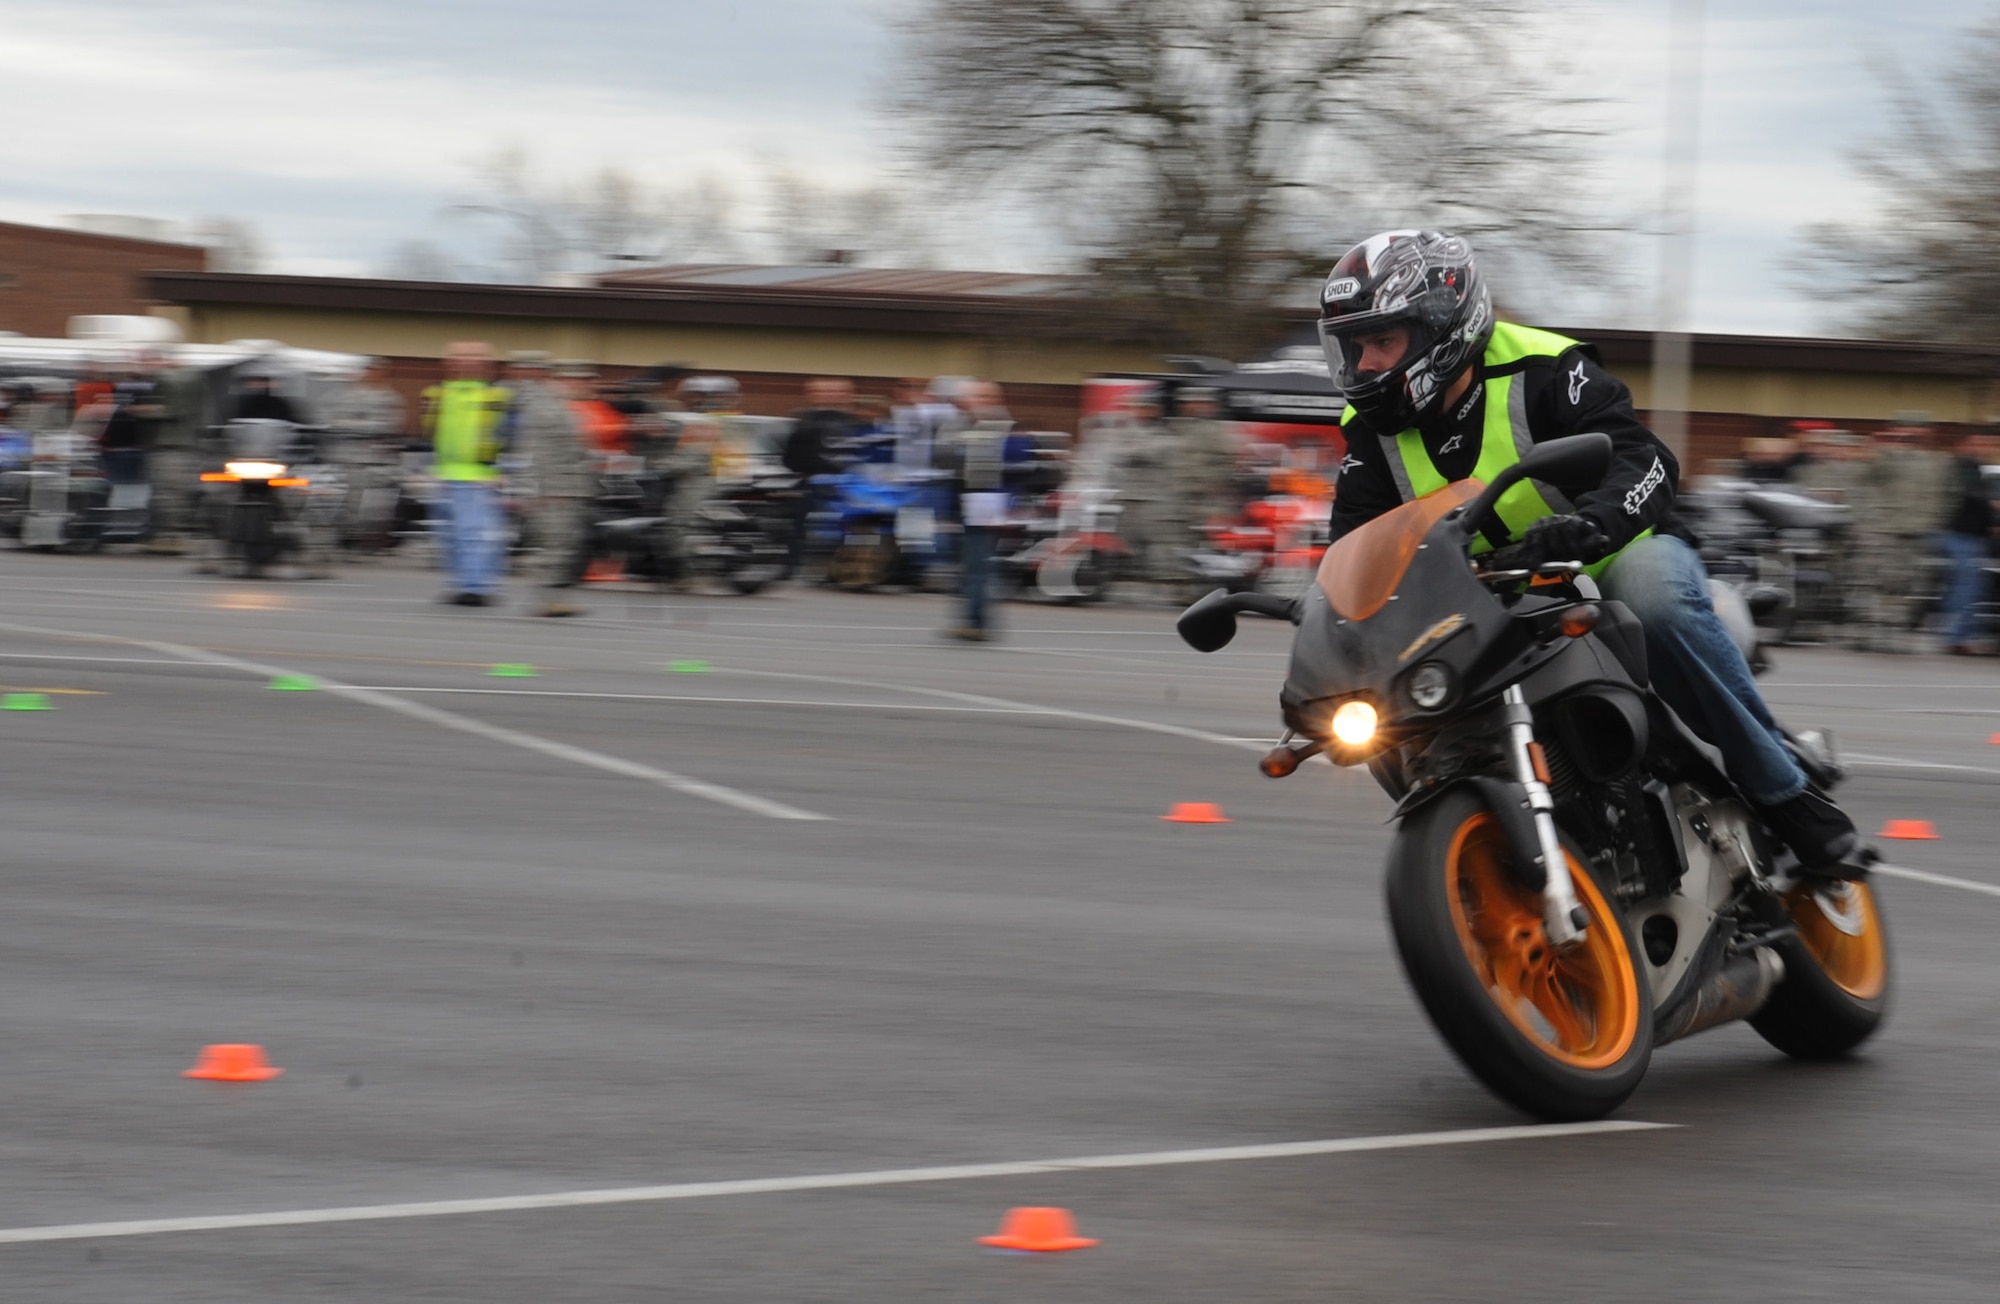 Staff Sgt. Ryan Schmettgoecke, 509th Munitions Squadron live delivery crew chief, participates in the Grant’s Gauntlet challenge during the annual Motorcycle Awareness and Safety Day at Whiteman Air Force Base, Mo., April 15, 2013. Riders should follow the TCLOCKS, (tires and wheels, controls, lights, oil, chassis and kickstand) pre-ride inspection before all rides. (U.S. Air Force photo by Airman 1st Class Bryan Crane/Released)